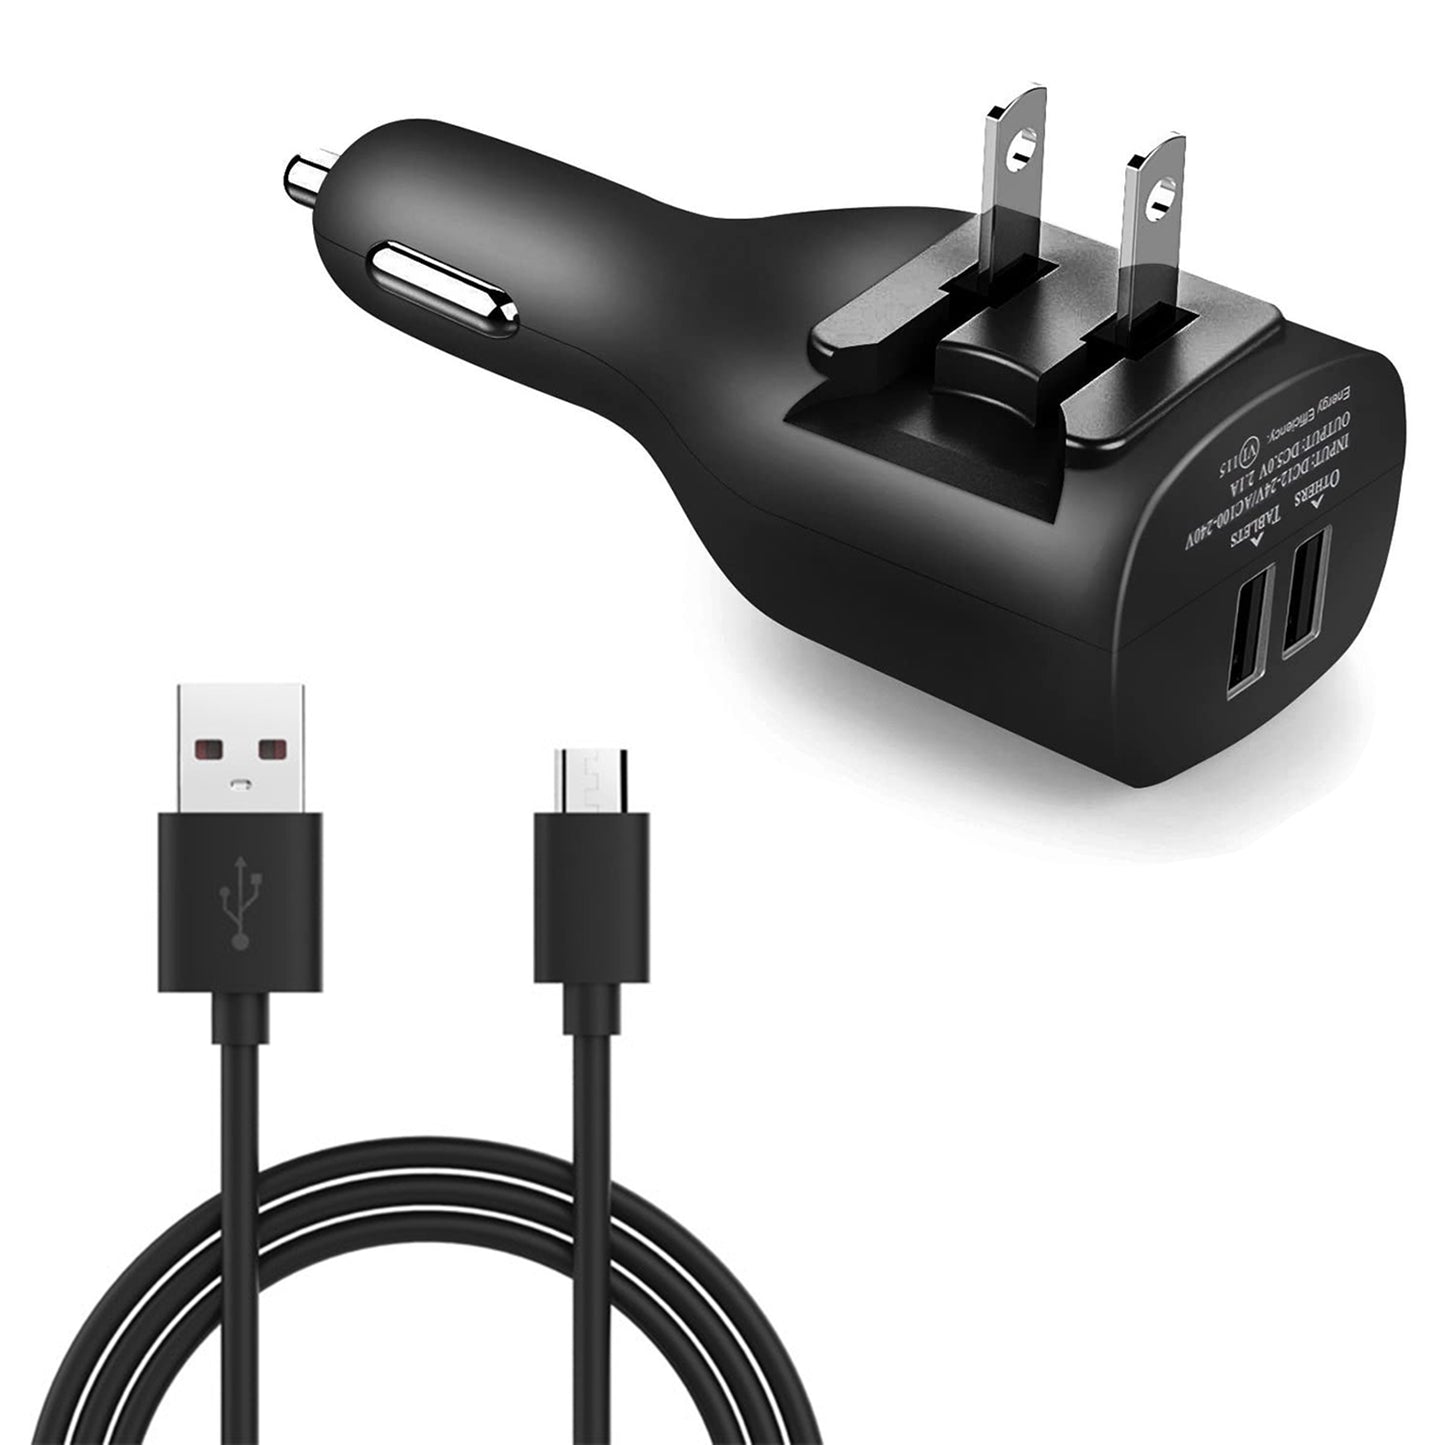 2-in-1 Car Home Charger 6ft Micro USB Cable Long Cord Travel Power Adapter Charging Wire Folding Prongs - ONY09